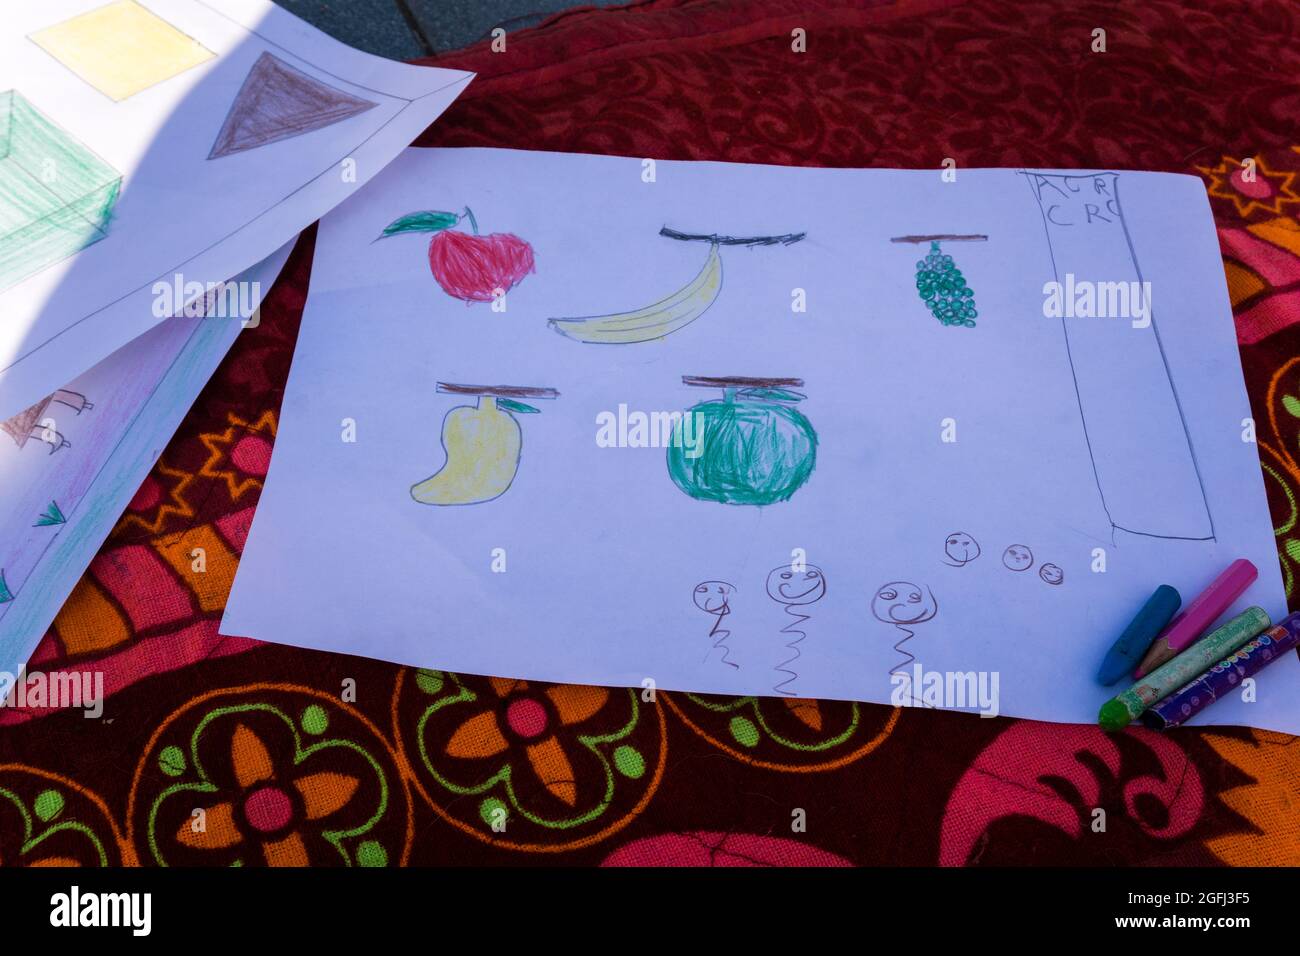 Child Draws A Pencil Drawing Of The World Stock Photo, Picture and Royalty  Free Image. Image 37139123.